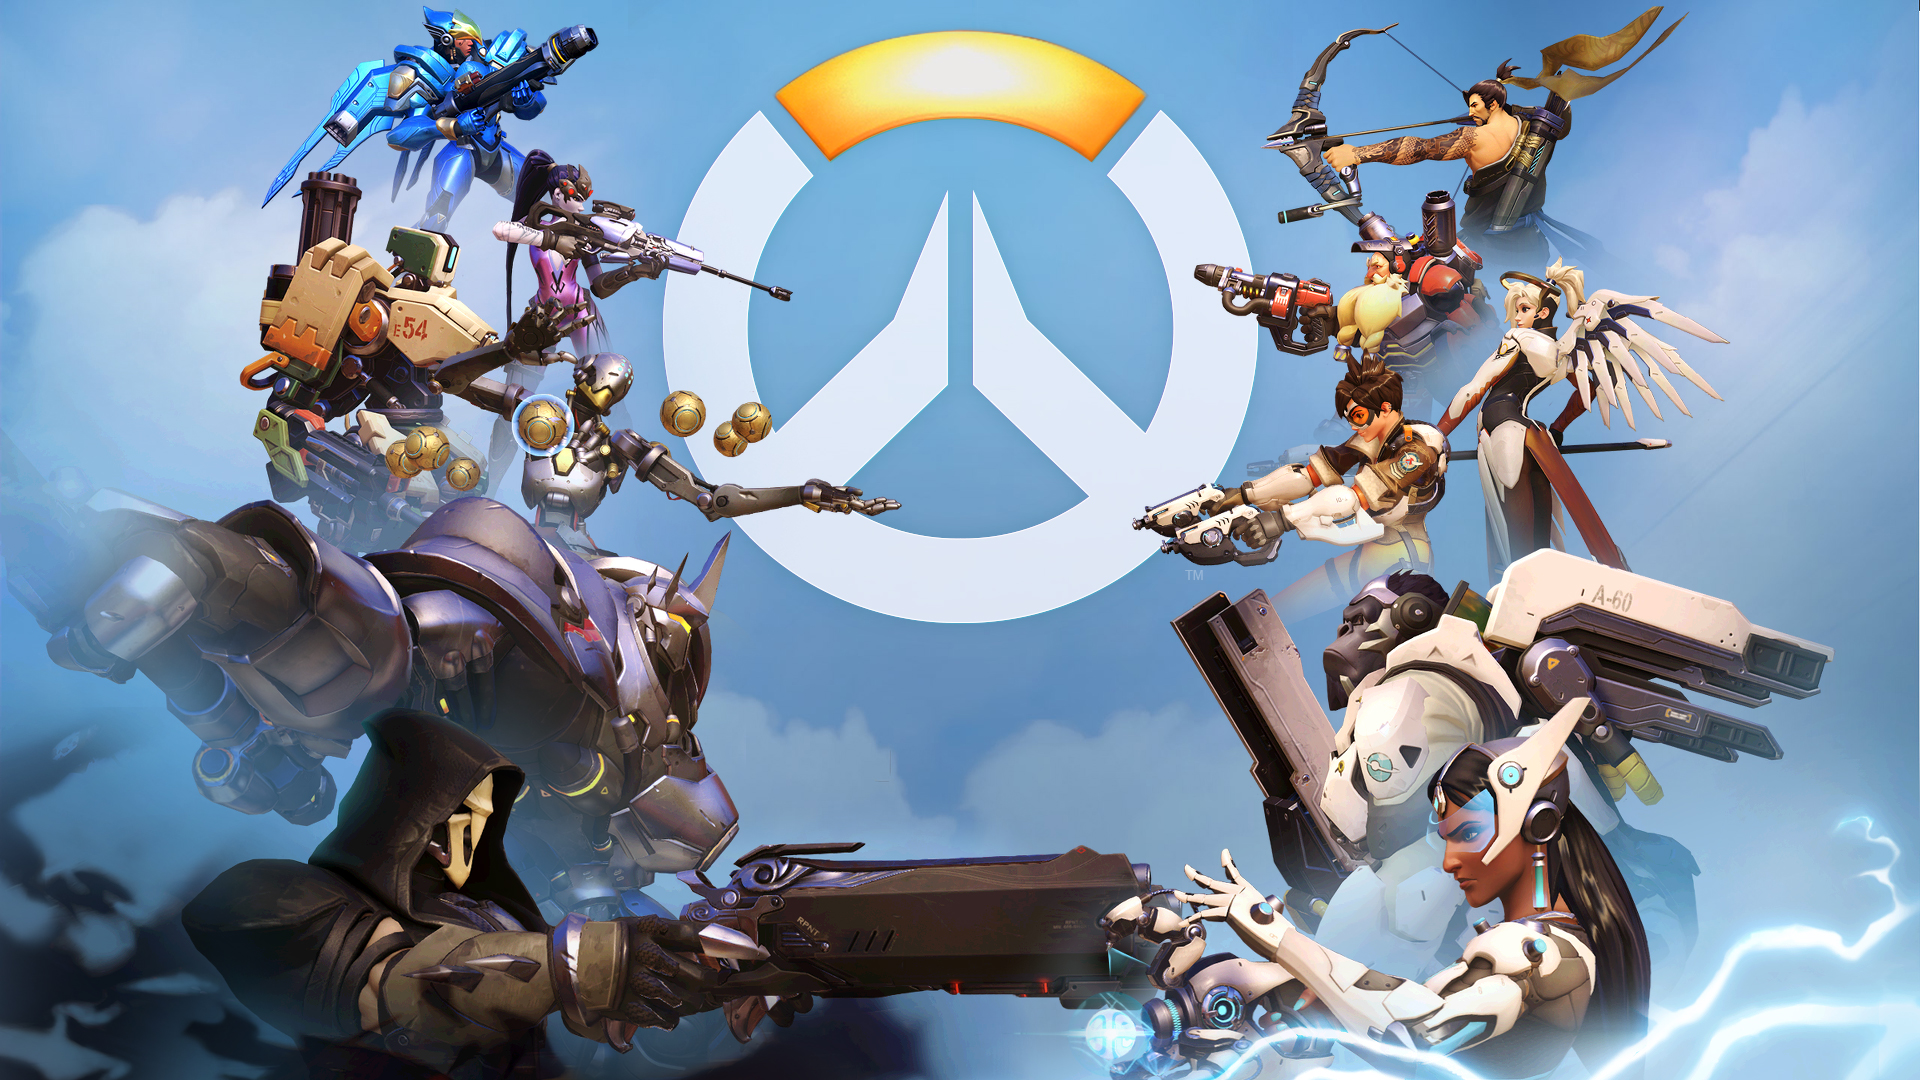 blizzard-ve-posible-llevar-overwatch-a-nintendo-switch-frikigamers.com